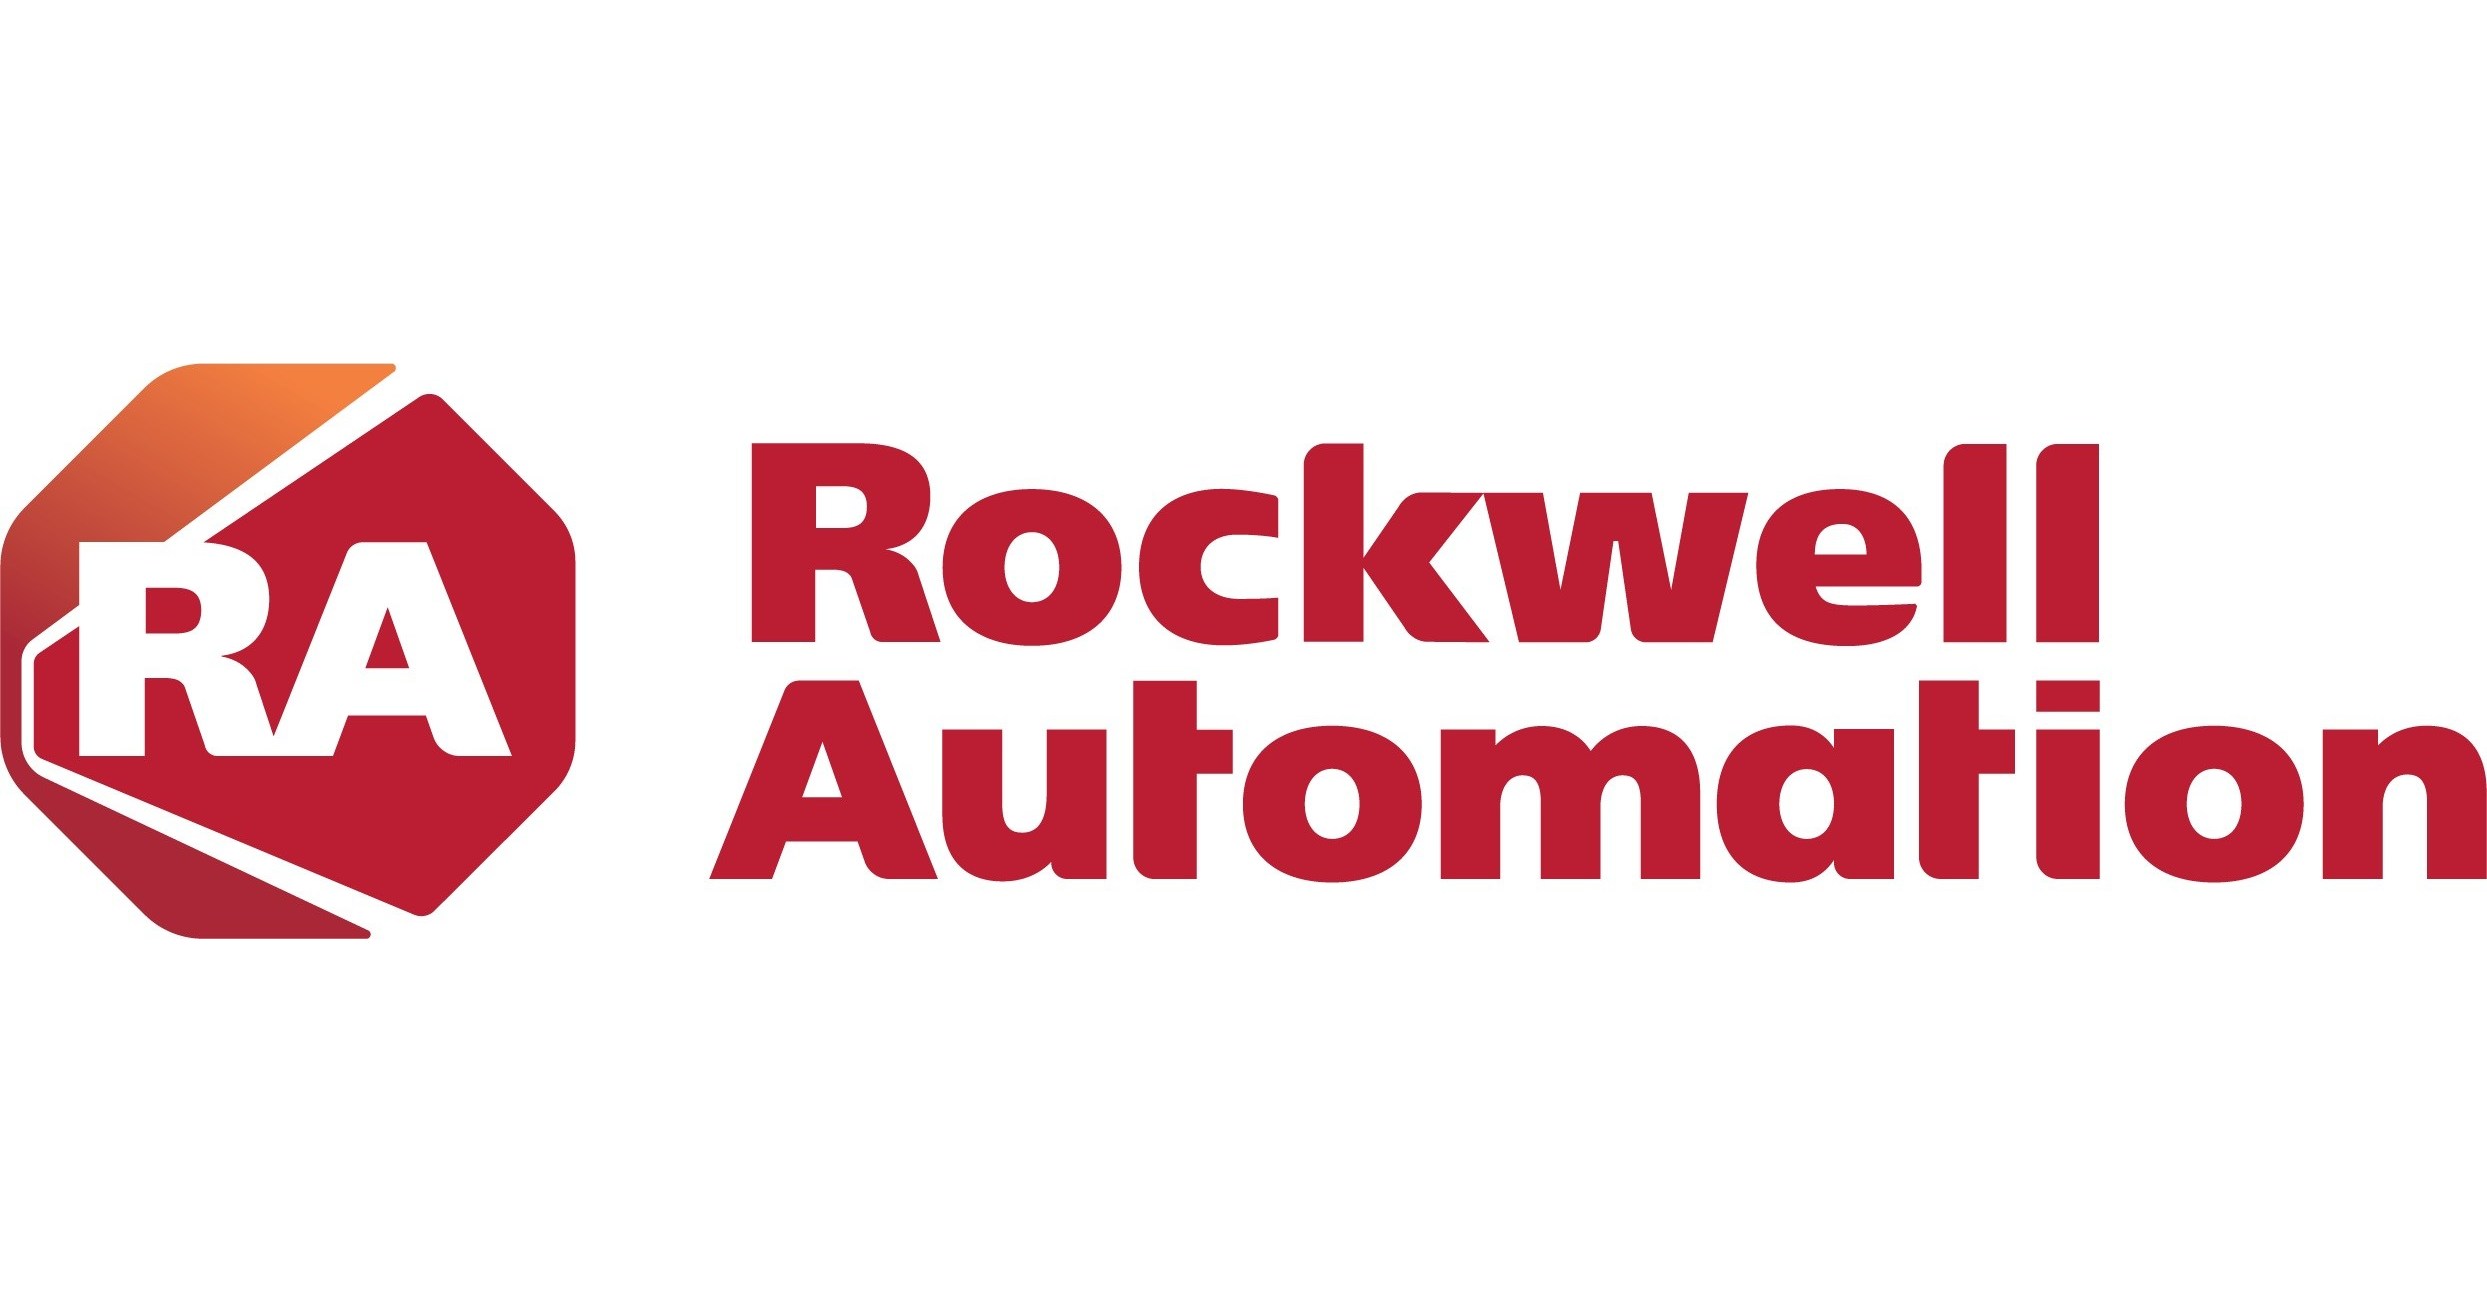 Rockwell Automation to Expand Industrial Cloud Software Offering with Acquisition of Plex Systems